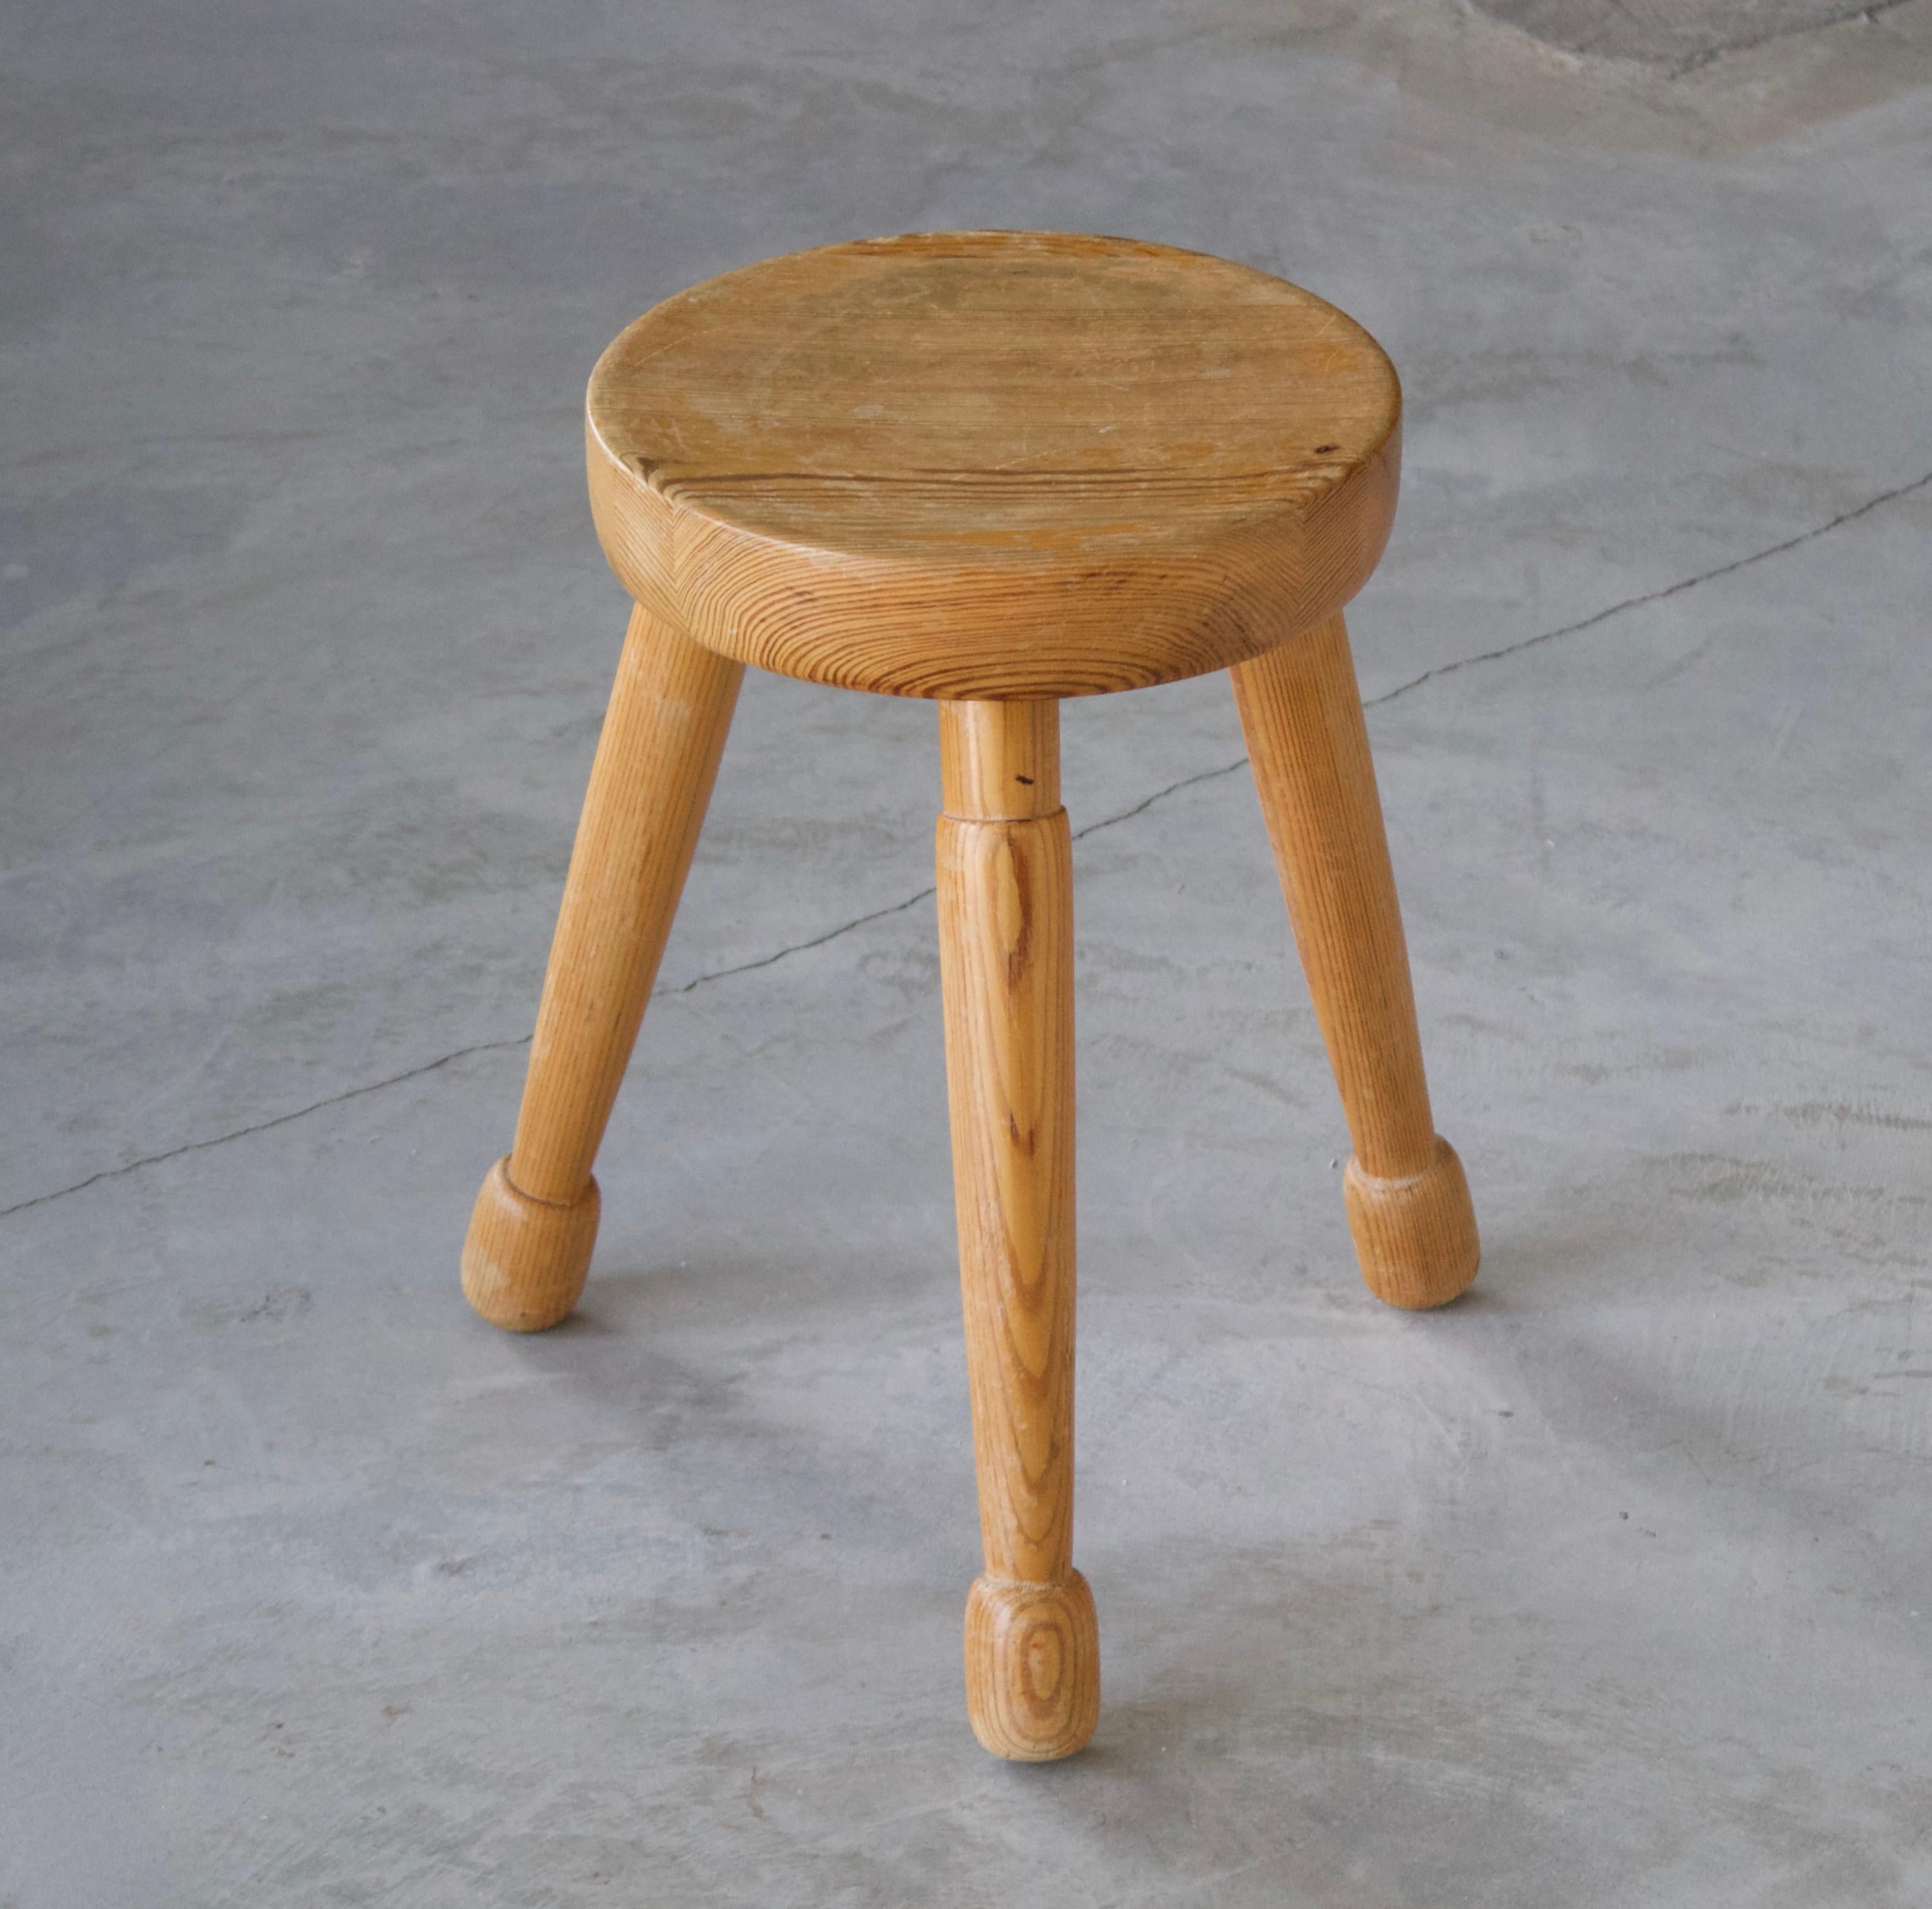 A Swedish pinewood stool or side table. By unknown designer, branded text and dated 1976. Original paper label indicating stool is handcrafted.





